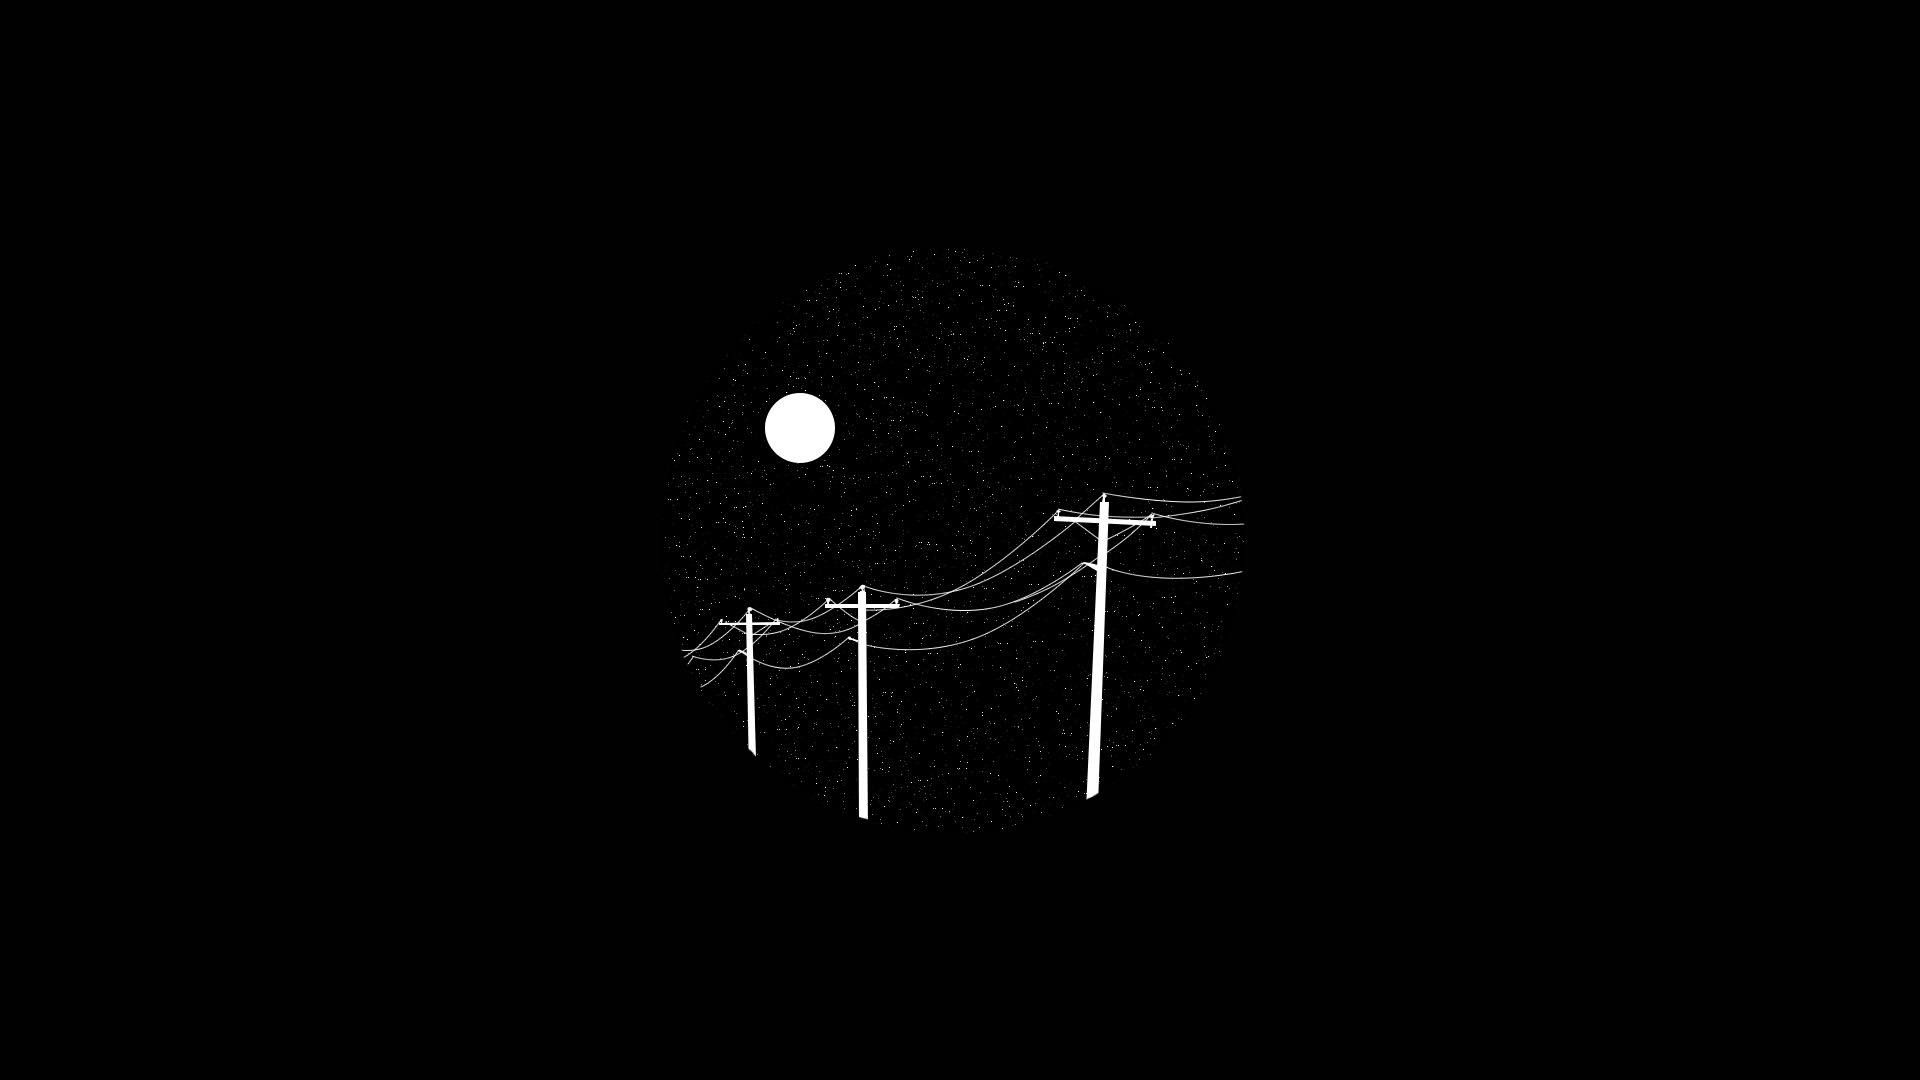 A black and white image of power lines in front of the moon - Black and white, moon phases, space